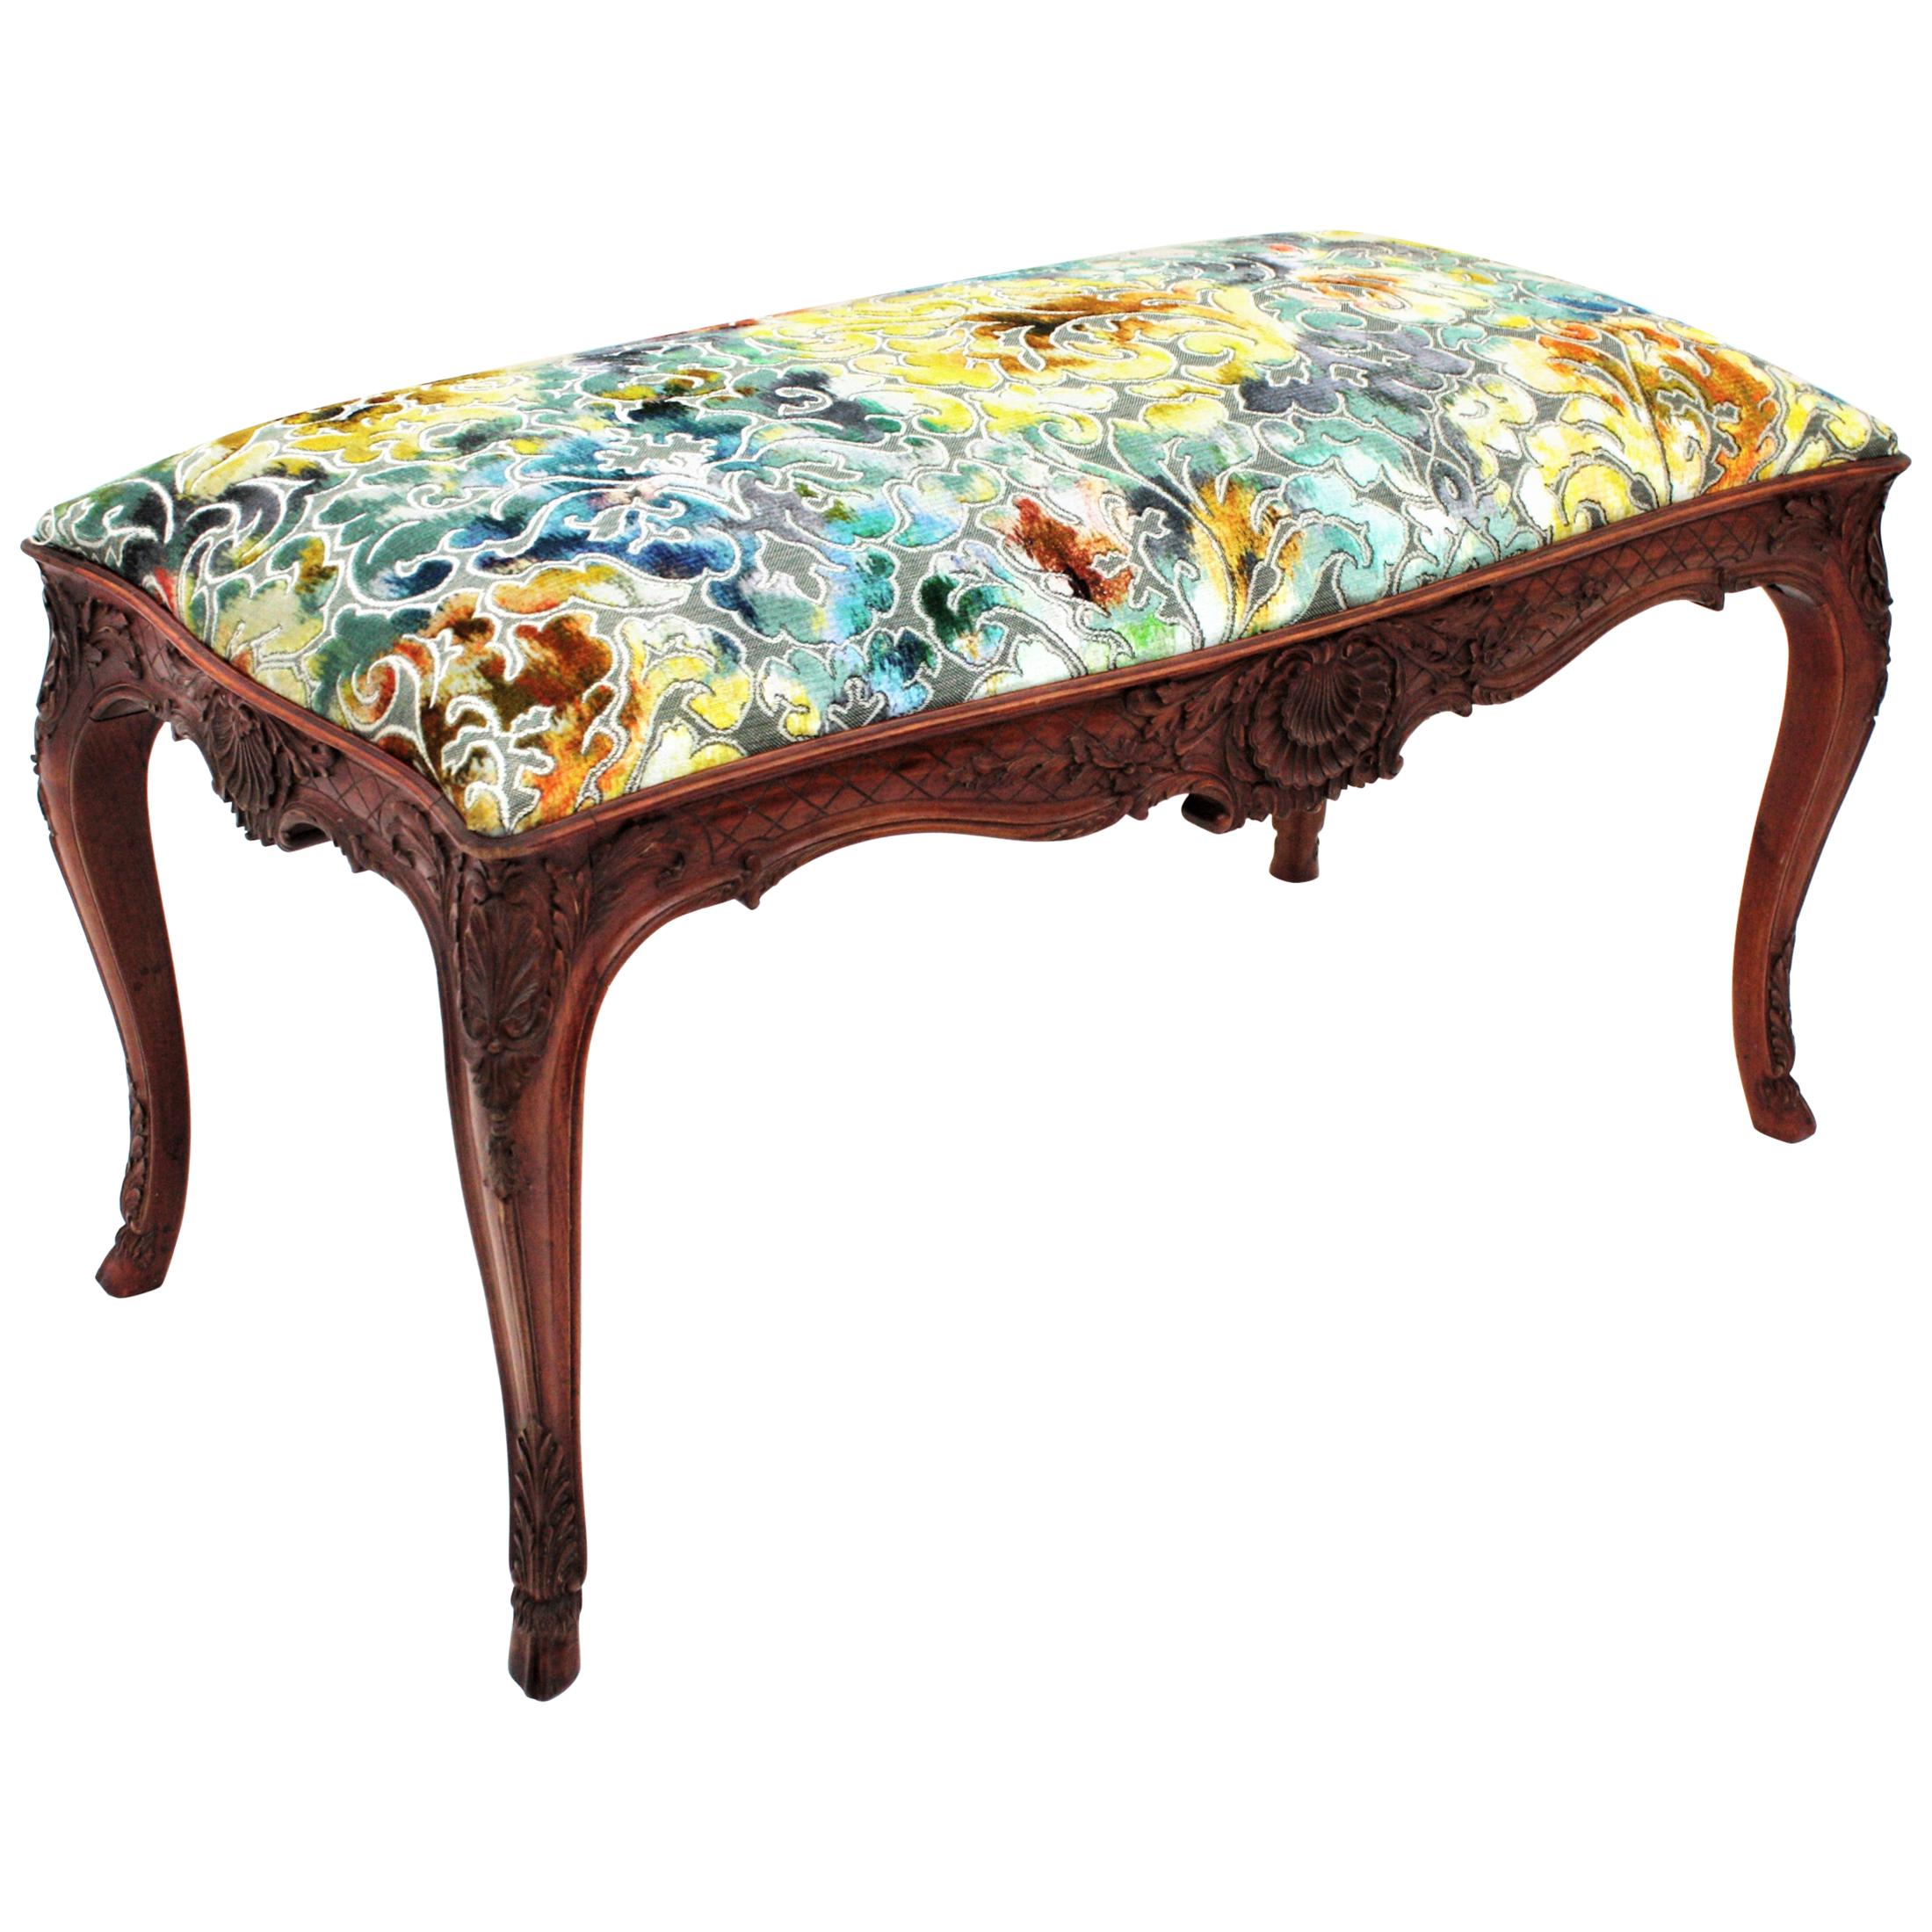 Finely hand carved Louis XV style walnut bench with colorful velvet upholstery, France, 1920s-1930s.
This stylish banquette stands up on graceful cabriole shaped legs with hoof feet endings. It is adorned overall with rocaille, foliate motifs and